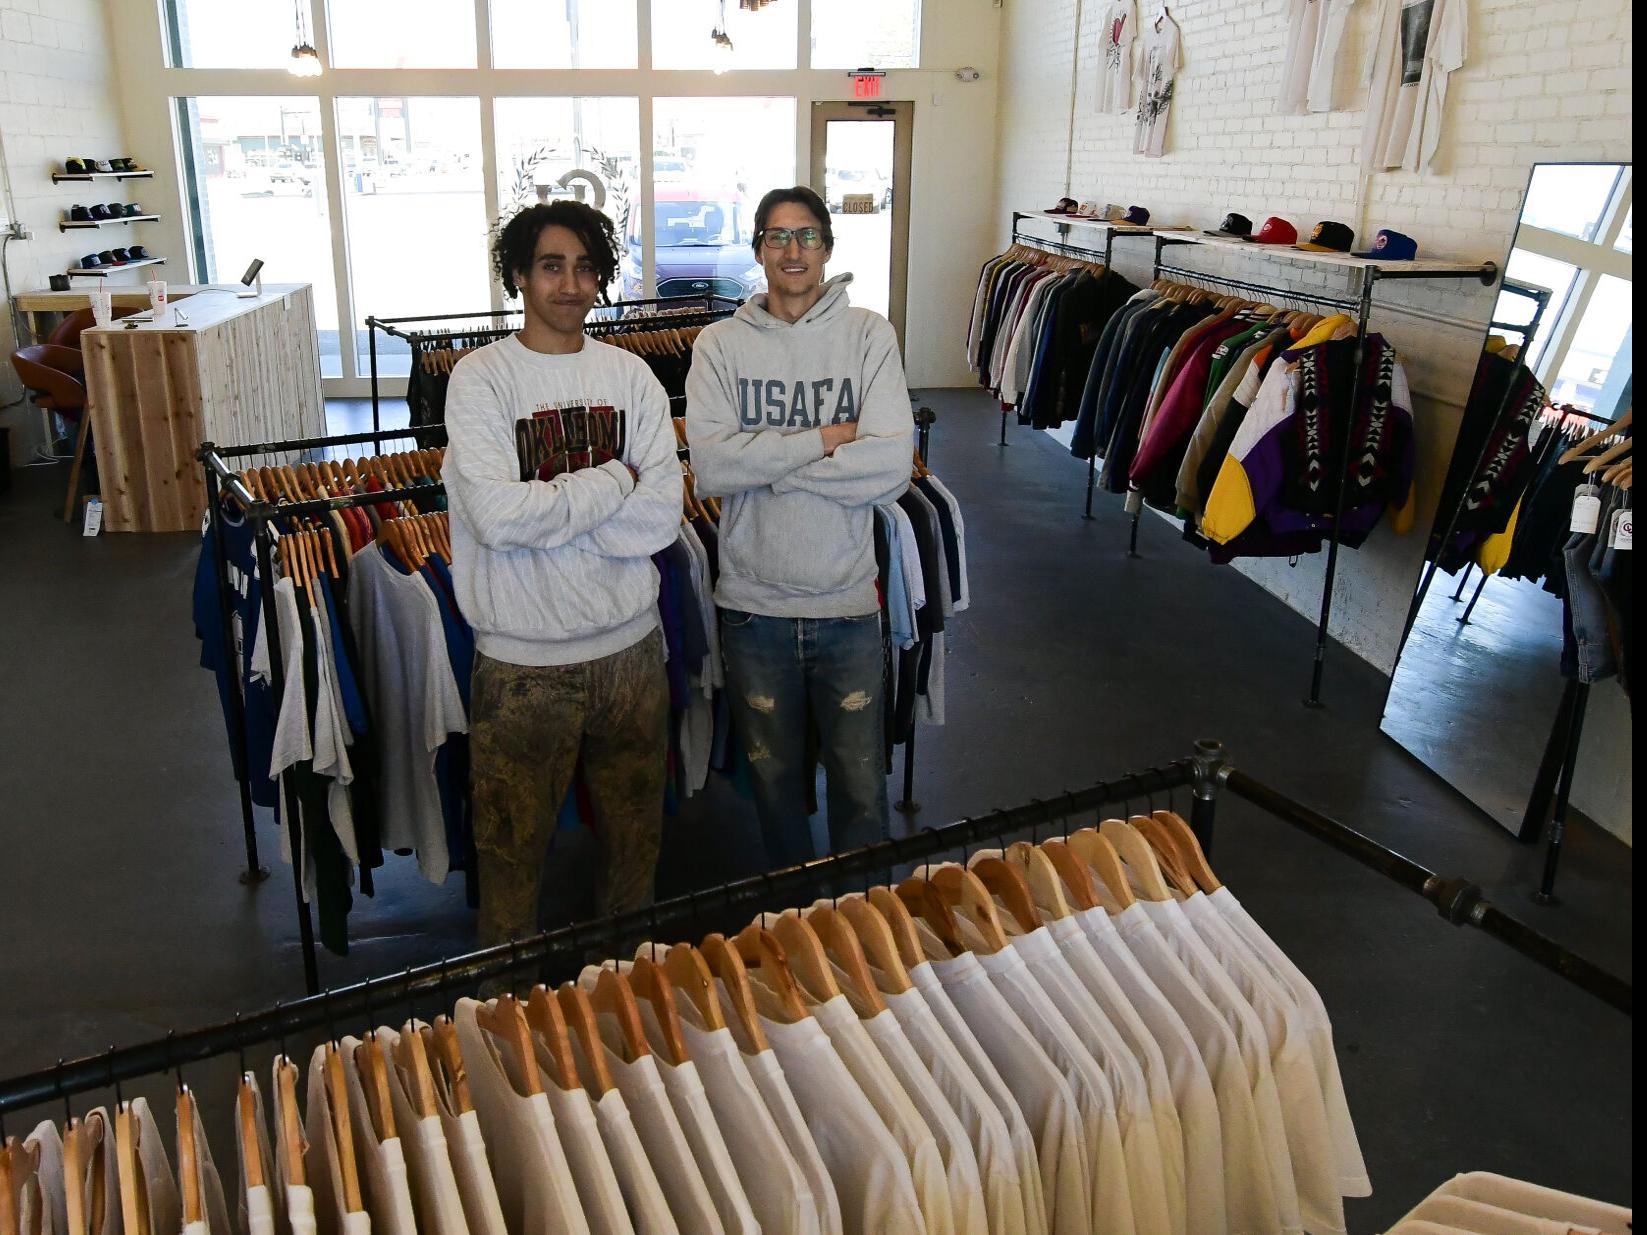 Crimson Vintage clothing store opens in east downtown Norman, News